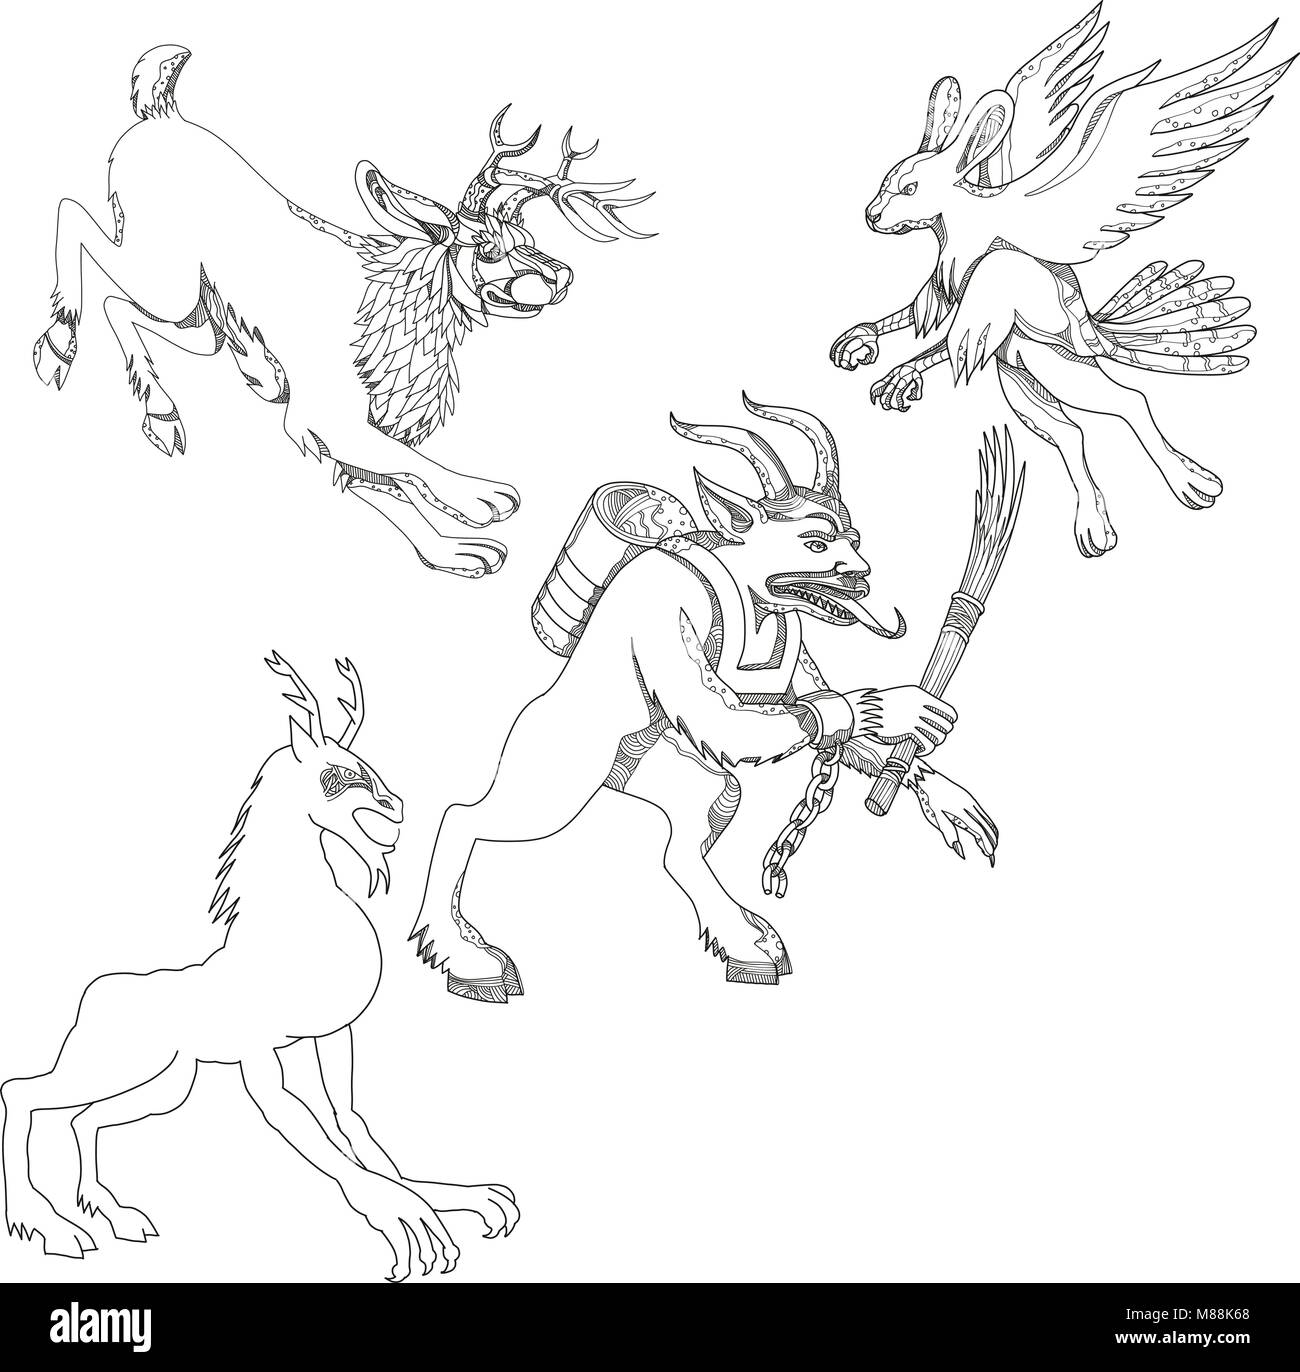 A collection of doodle art illustrations that includes the following mythical creatures from legend folklore; jackalope, krampus, skraver, wendigo and Stock Vector